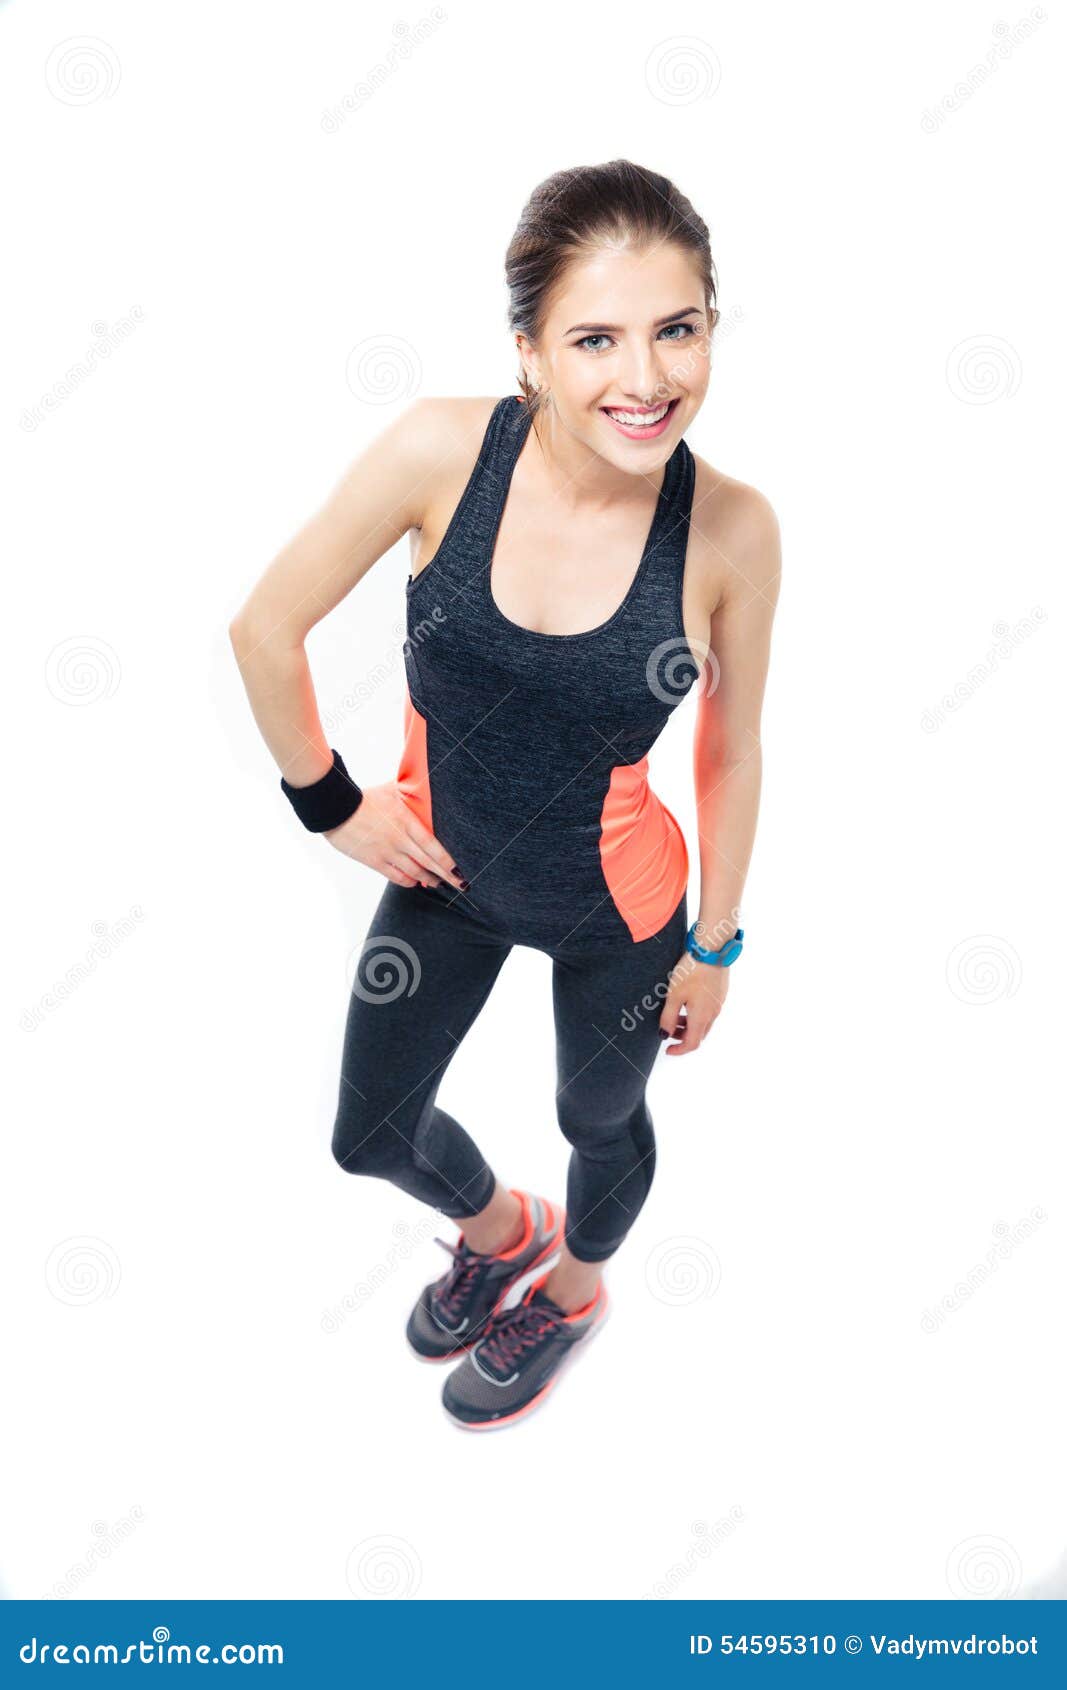 Smiling Fitness Woman Posing Over White Background Stock Photo - Image ...